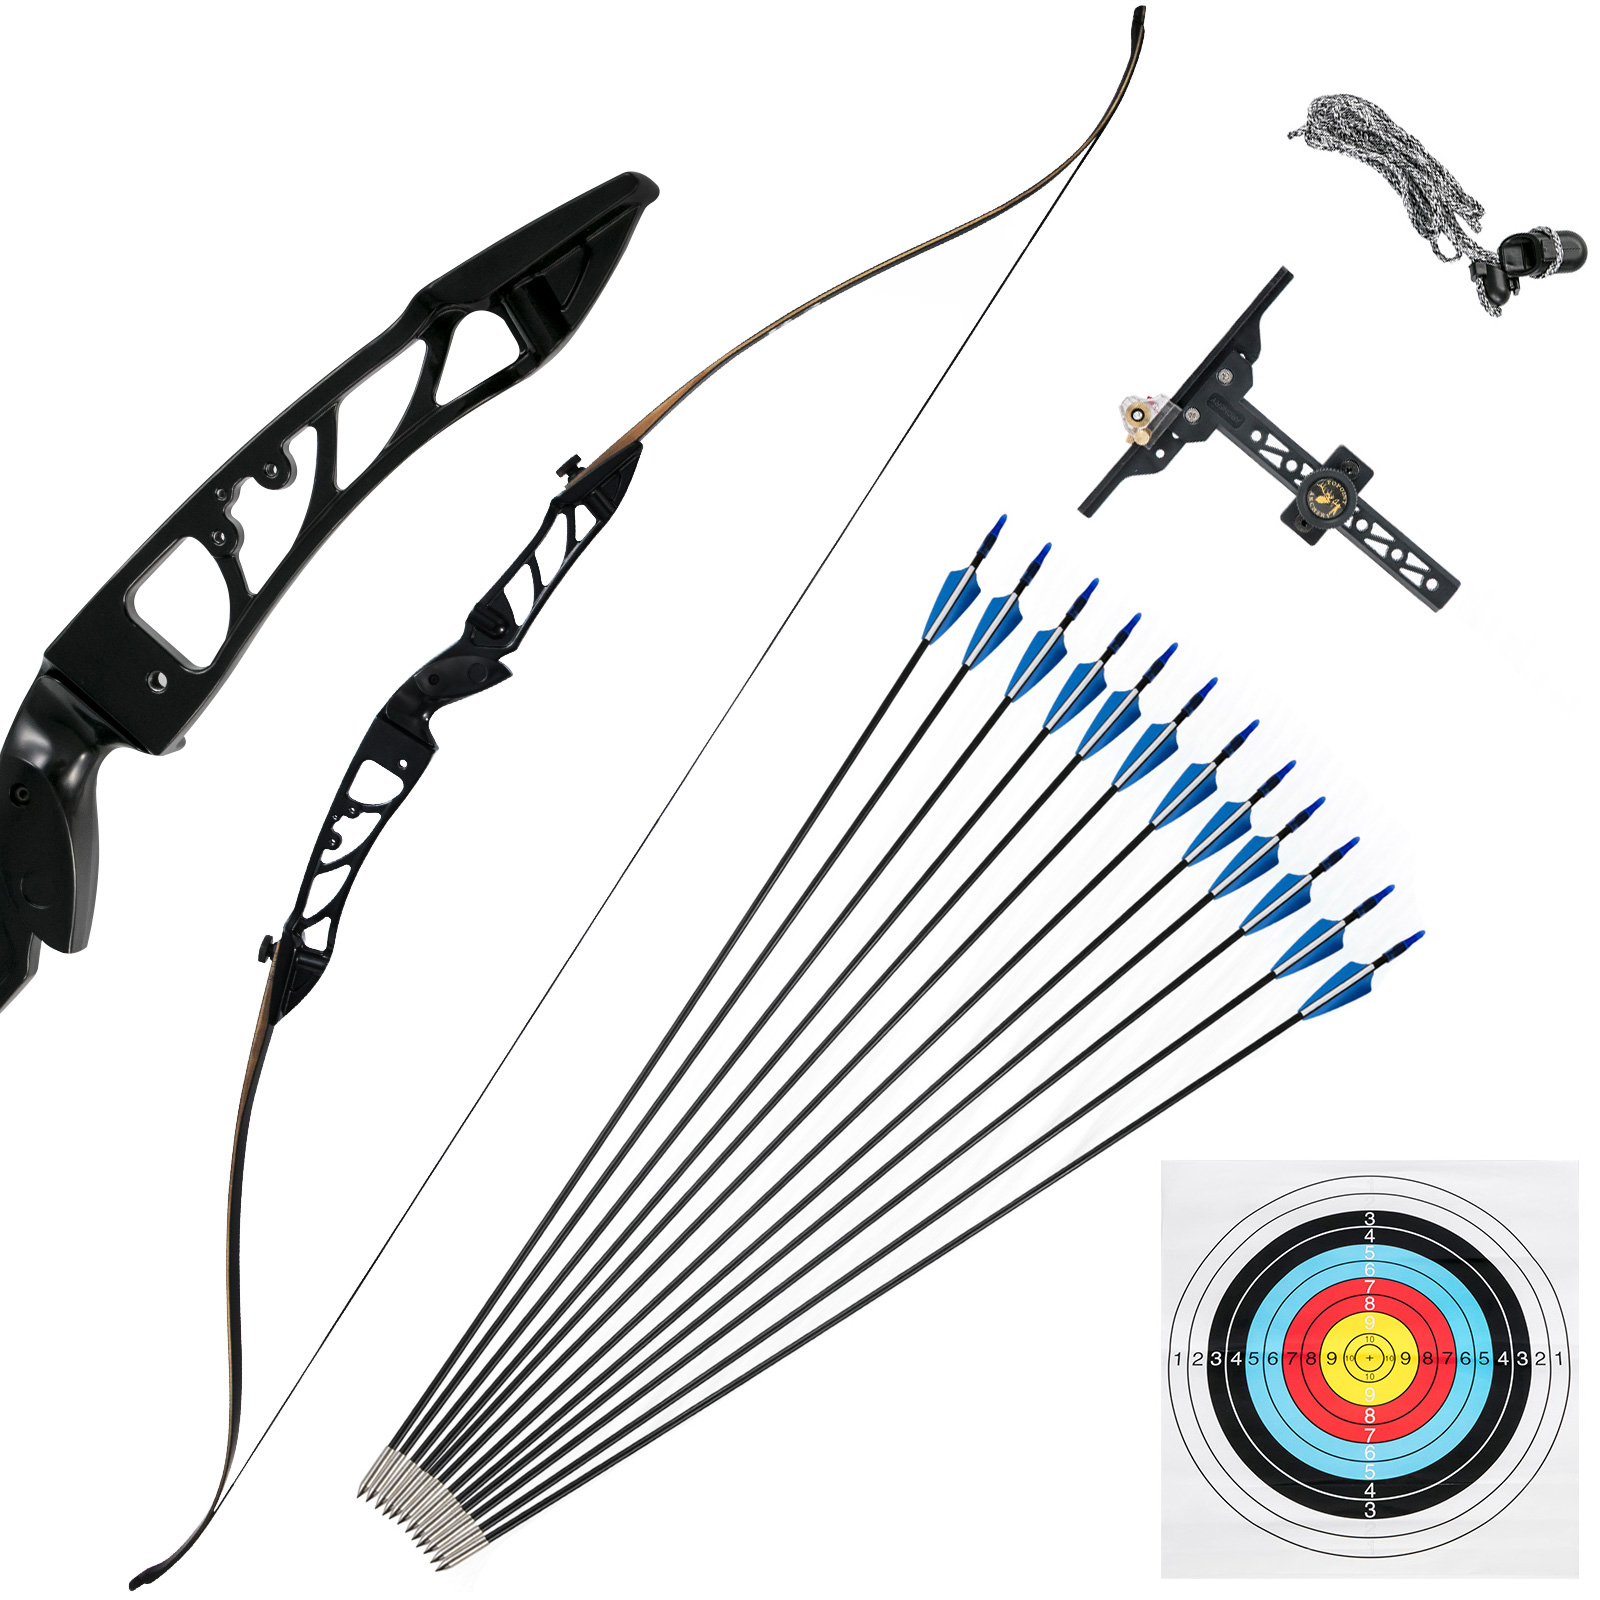 Takedown Recurve BowSet 18LBS Archery BowArrow Adults Youth Shooting Practice от Vevor Many GEOs